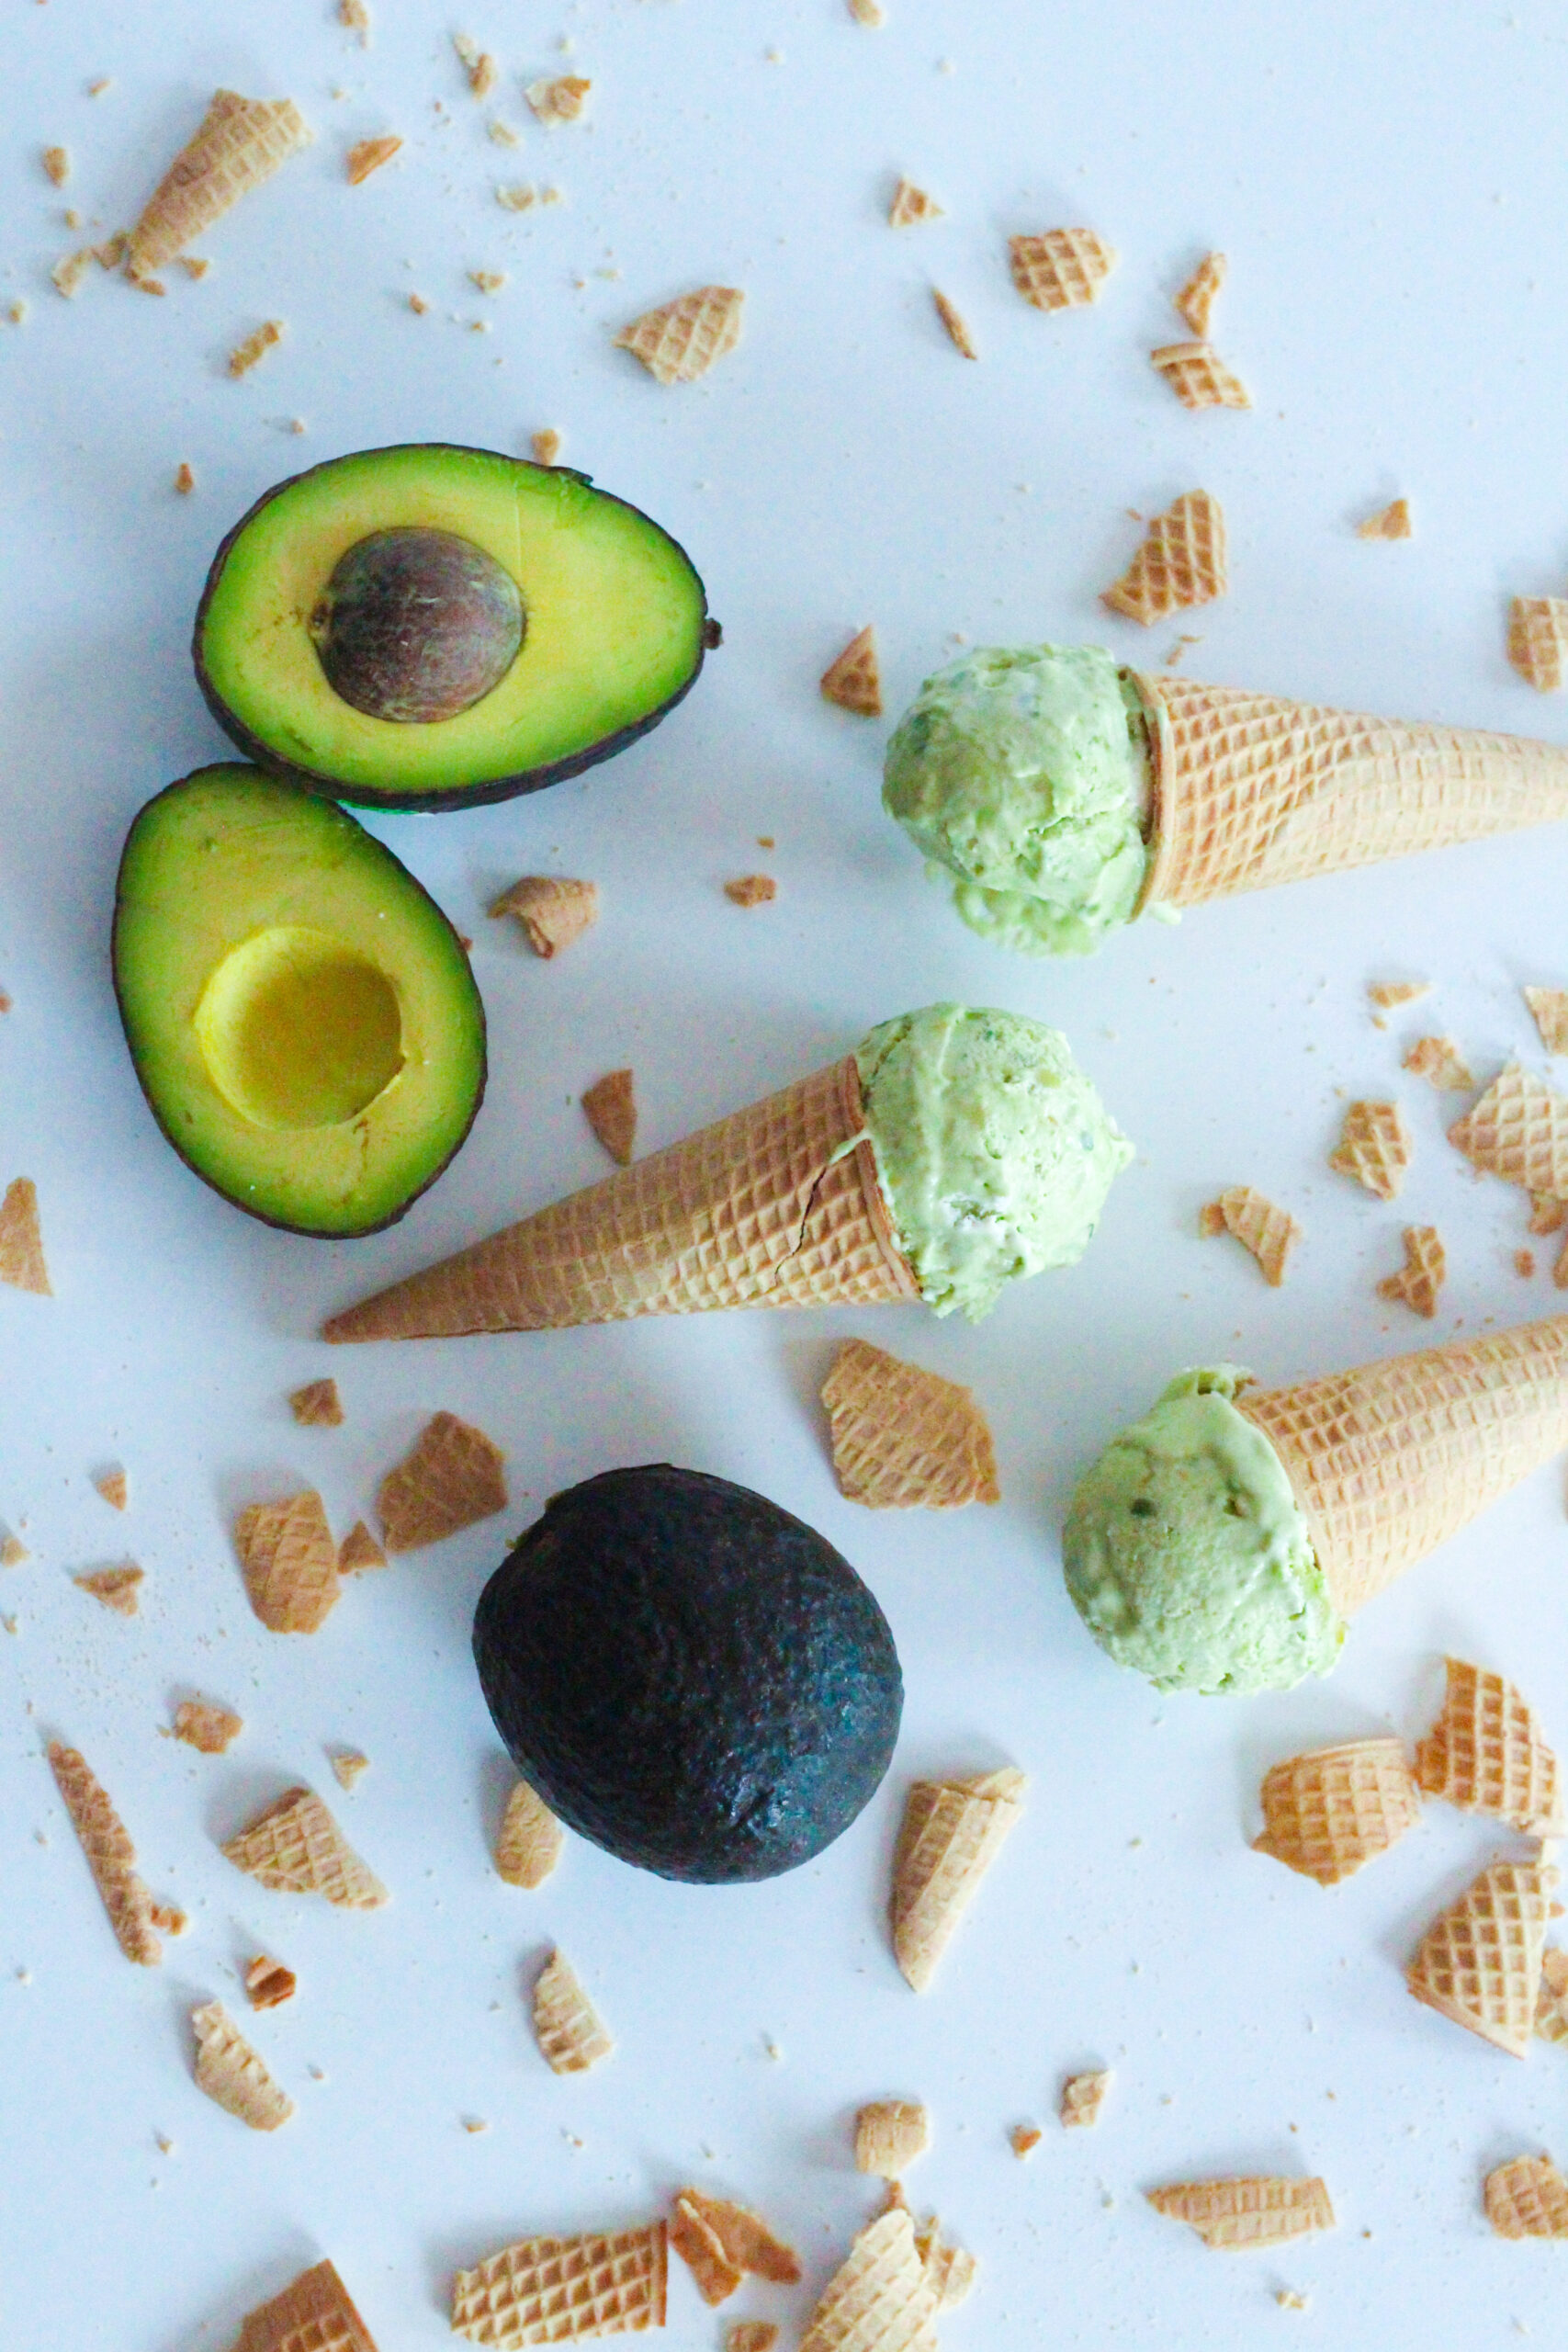 Top down view of three cones, each with one scoop of avocado ice cream on each cone. The cones are laying on their sides on a white surface, facing alternate directions. There are two halves of an avocado in the upper left corner and a whole avocado in the lower center. There are broken pieces of ice cream cones surrounding the cones and avocados.